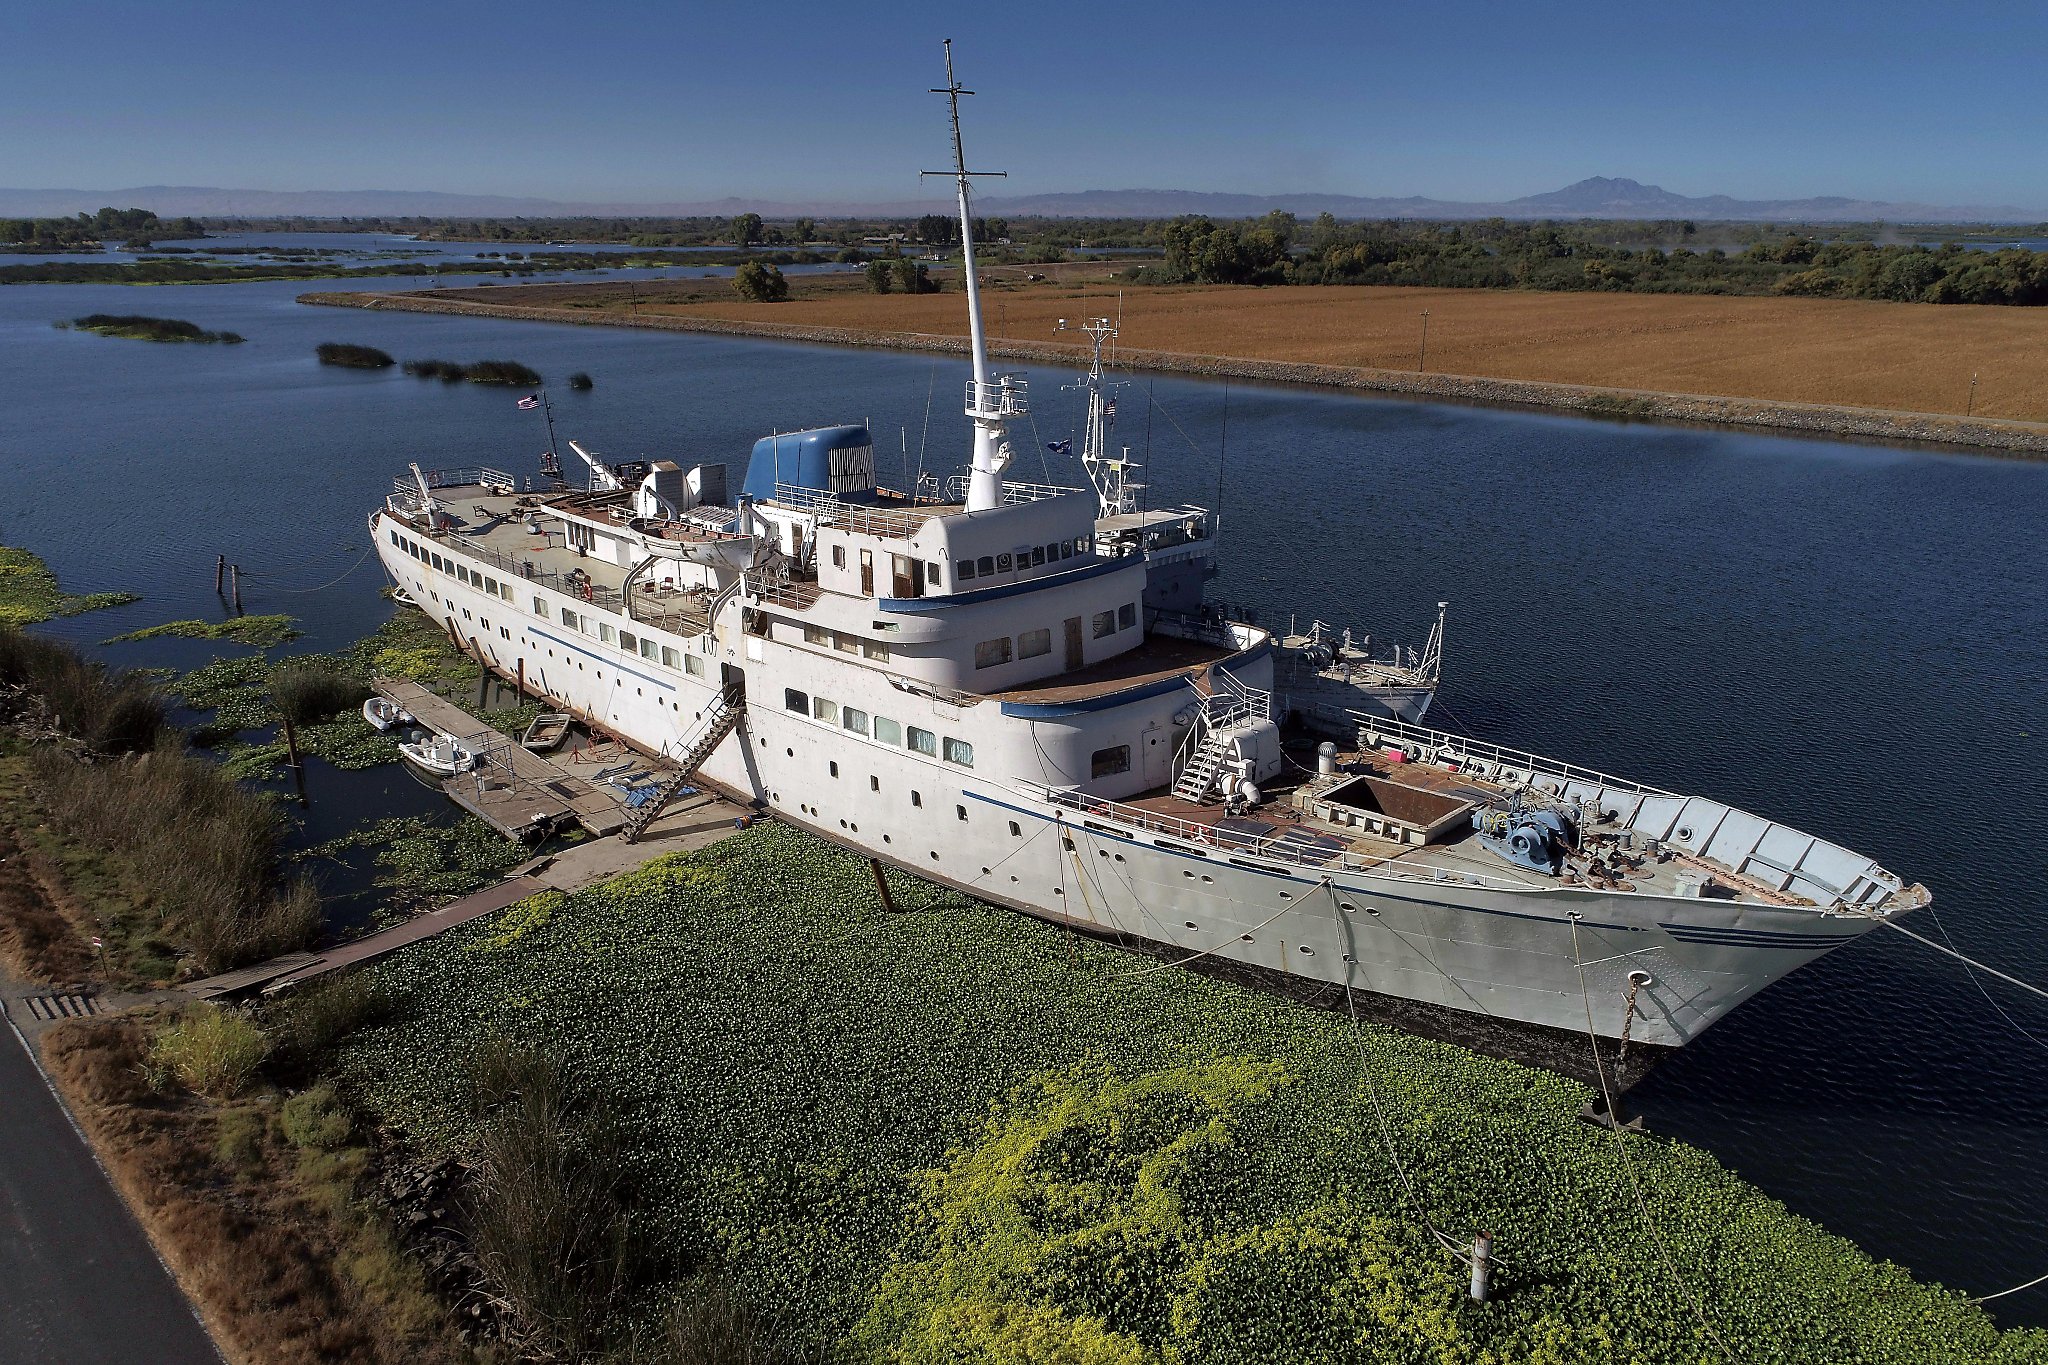 He lives in a 65-year-old cruise ship idling in the California Delta pic image